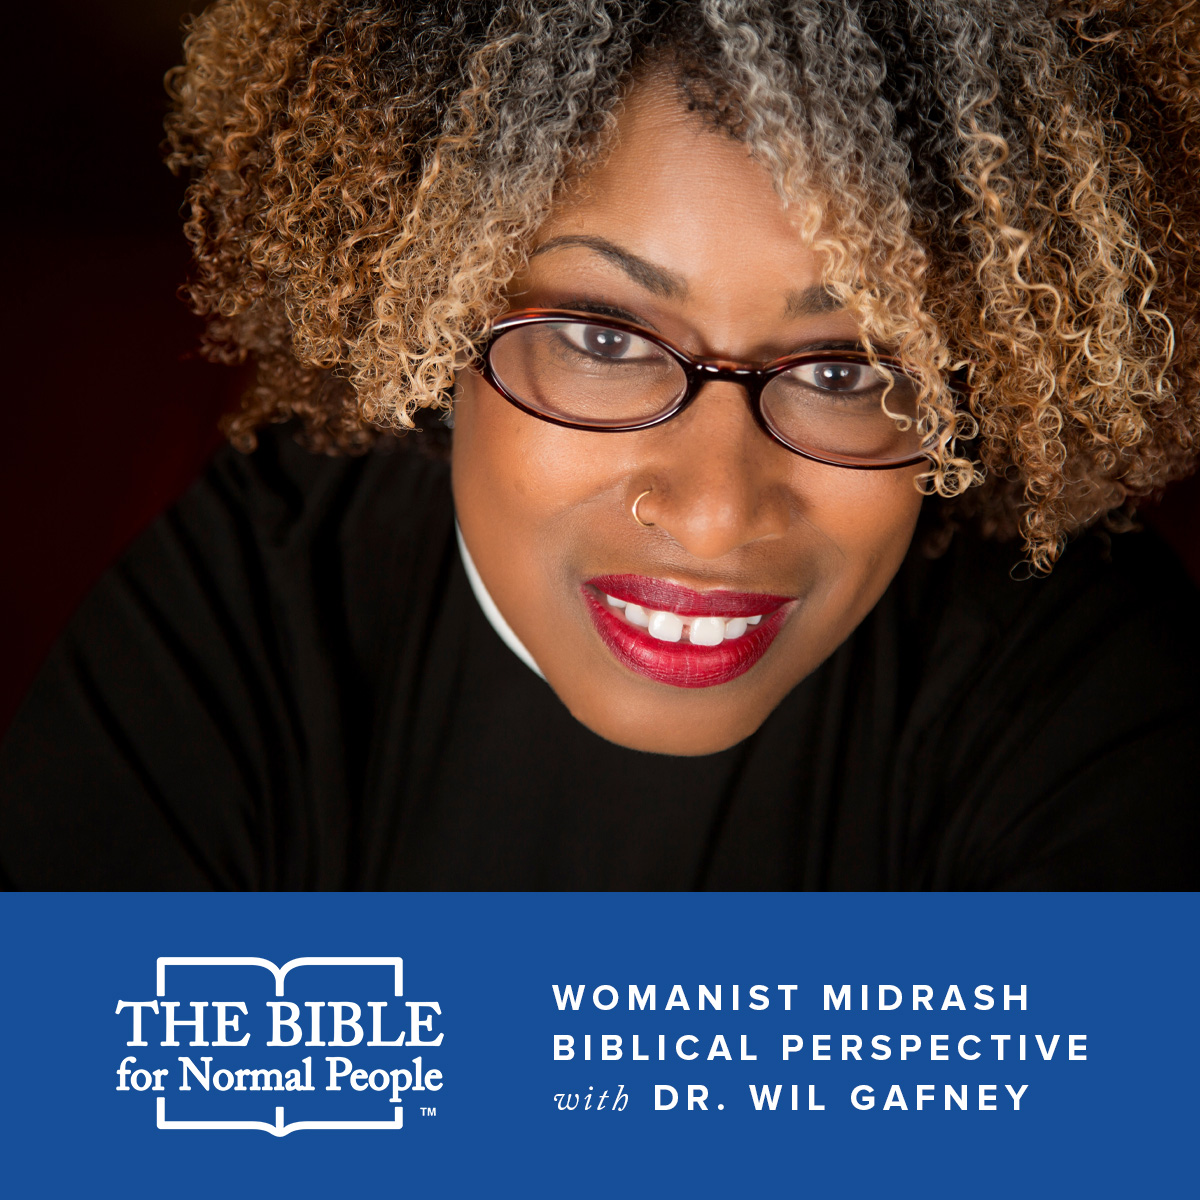 Interview with Dr. Wil Gafney: Womanist Midrash Perspective on the Biblical Text